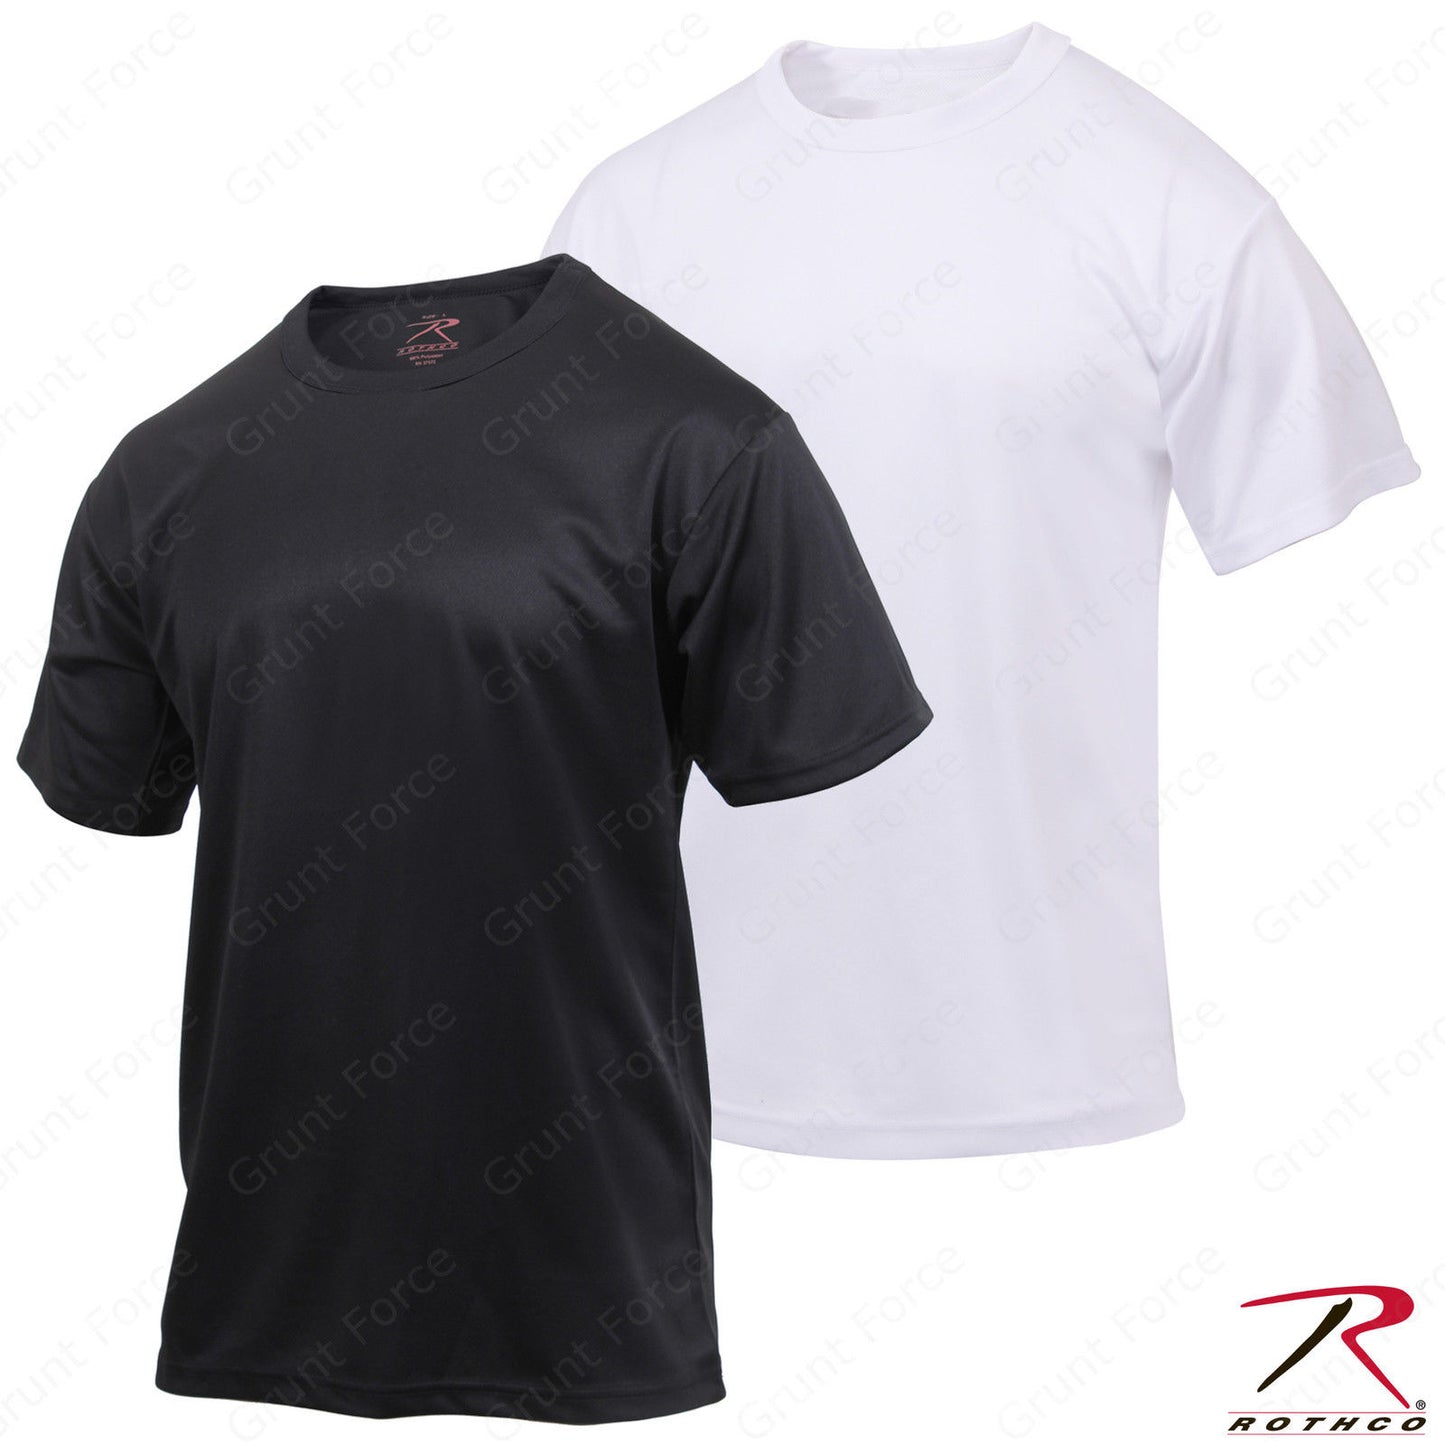 Men's Moisture Wicking T-Shirt Black or White - Rothco Quick Dry Polyester Tee